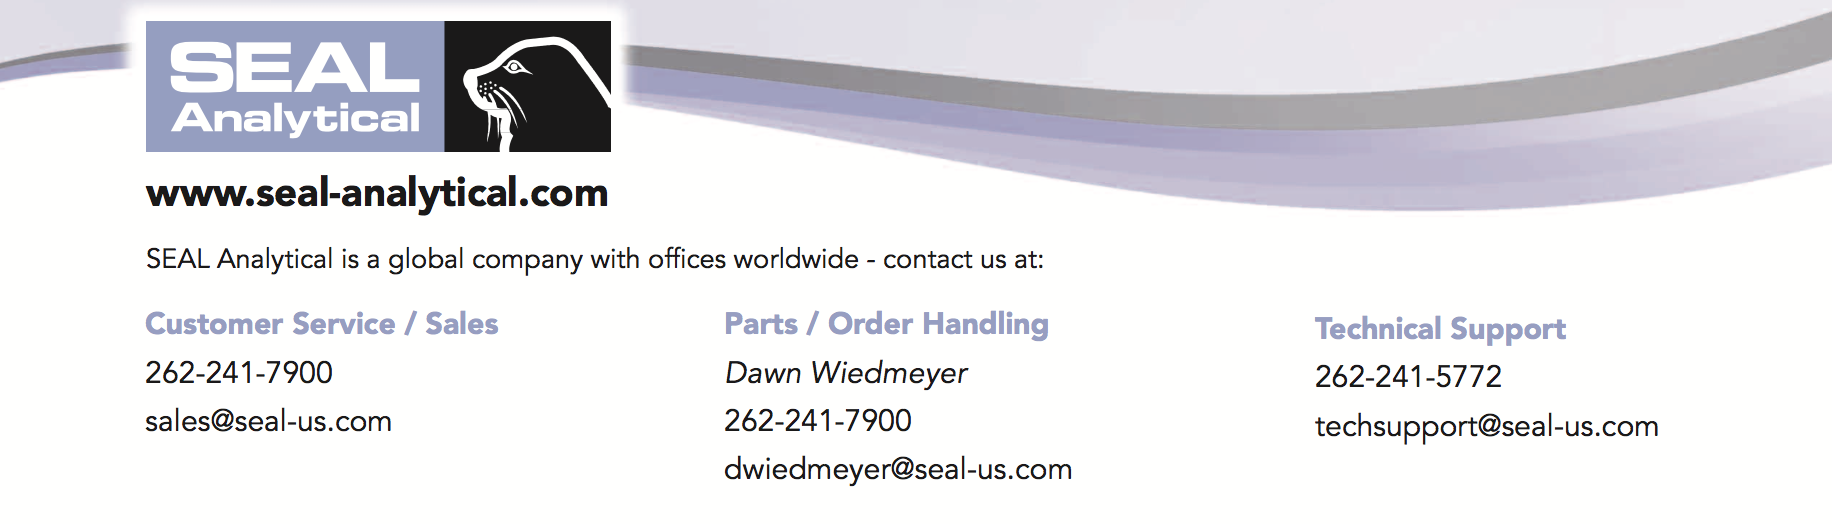 Contact SEAL Analytical